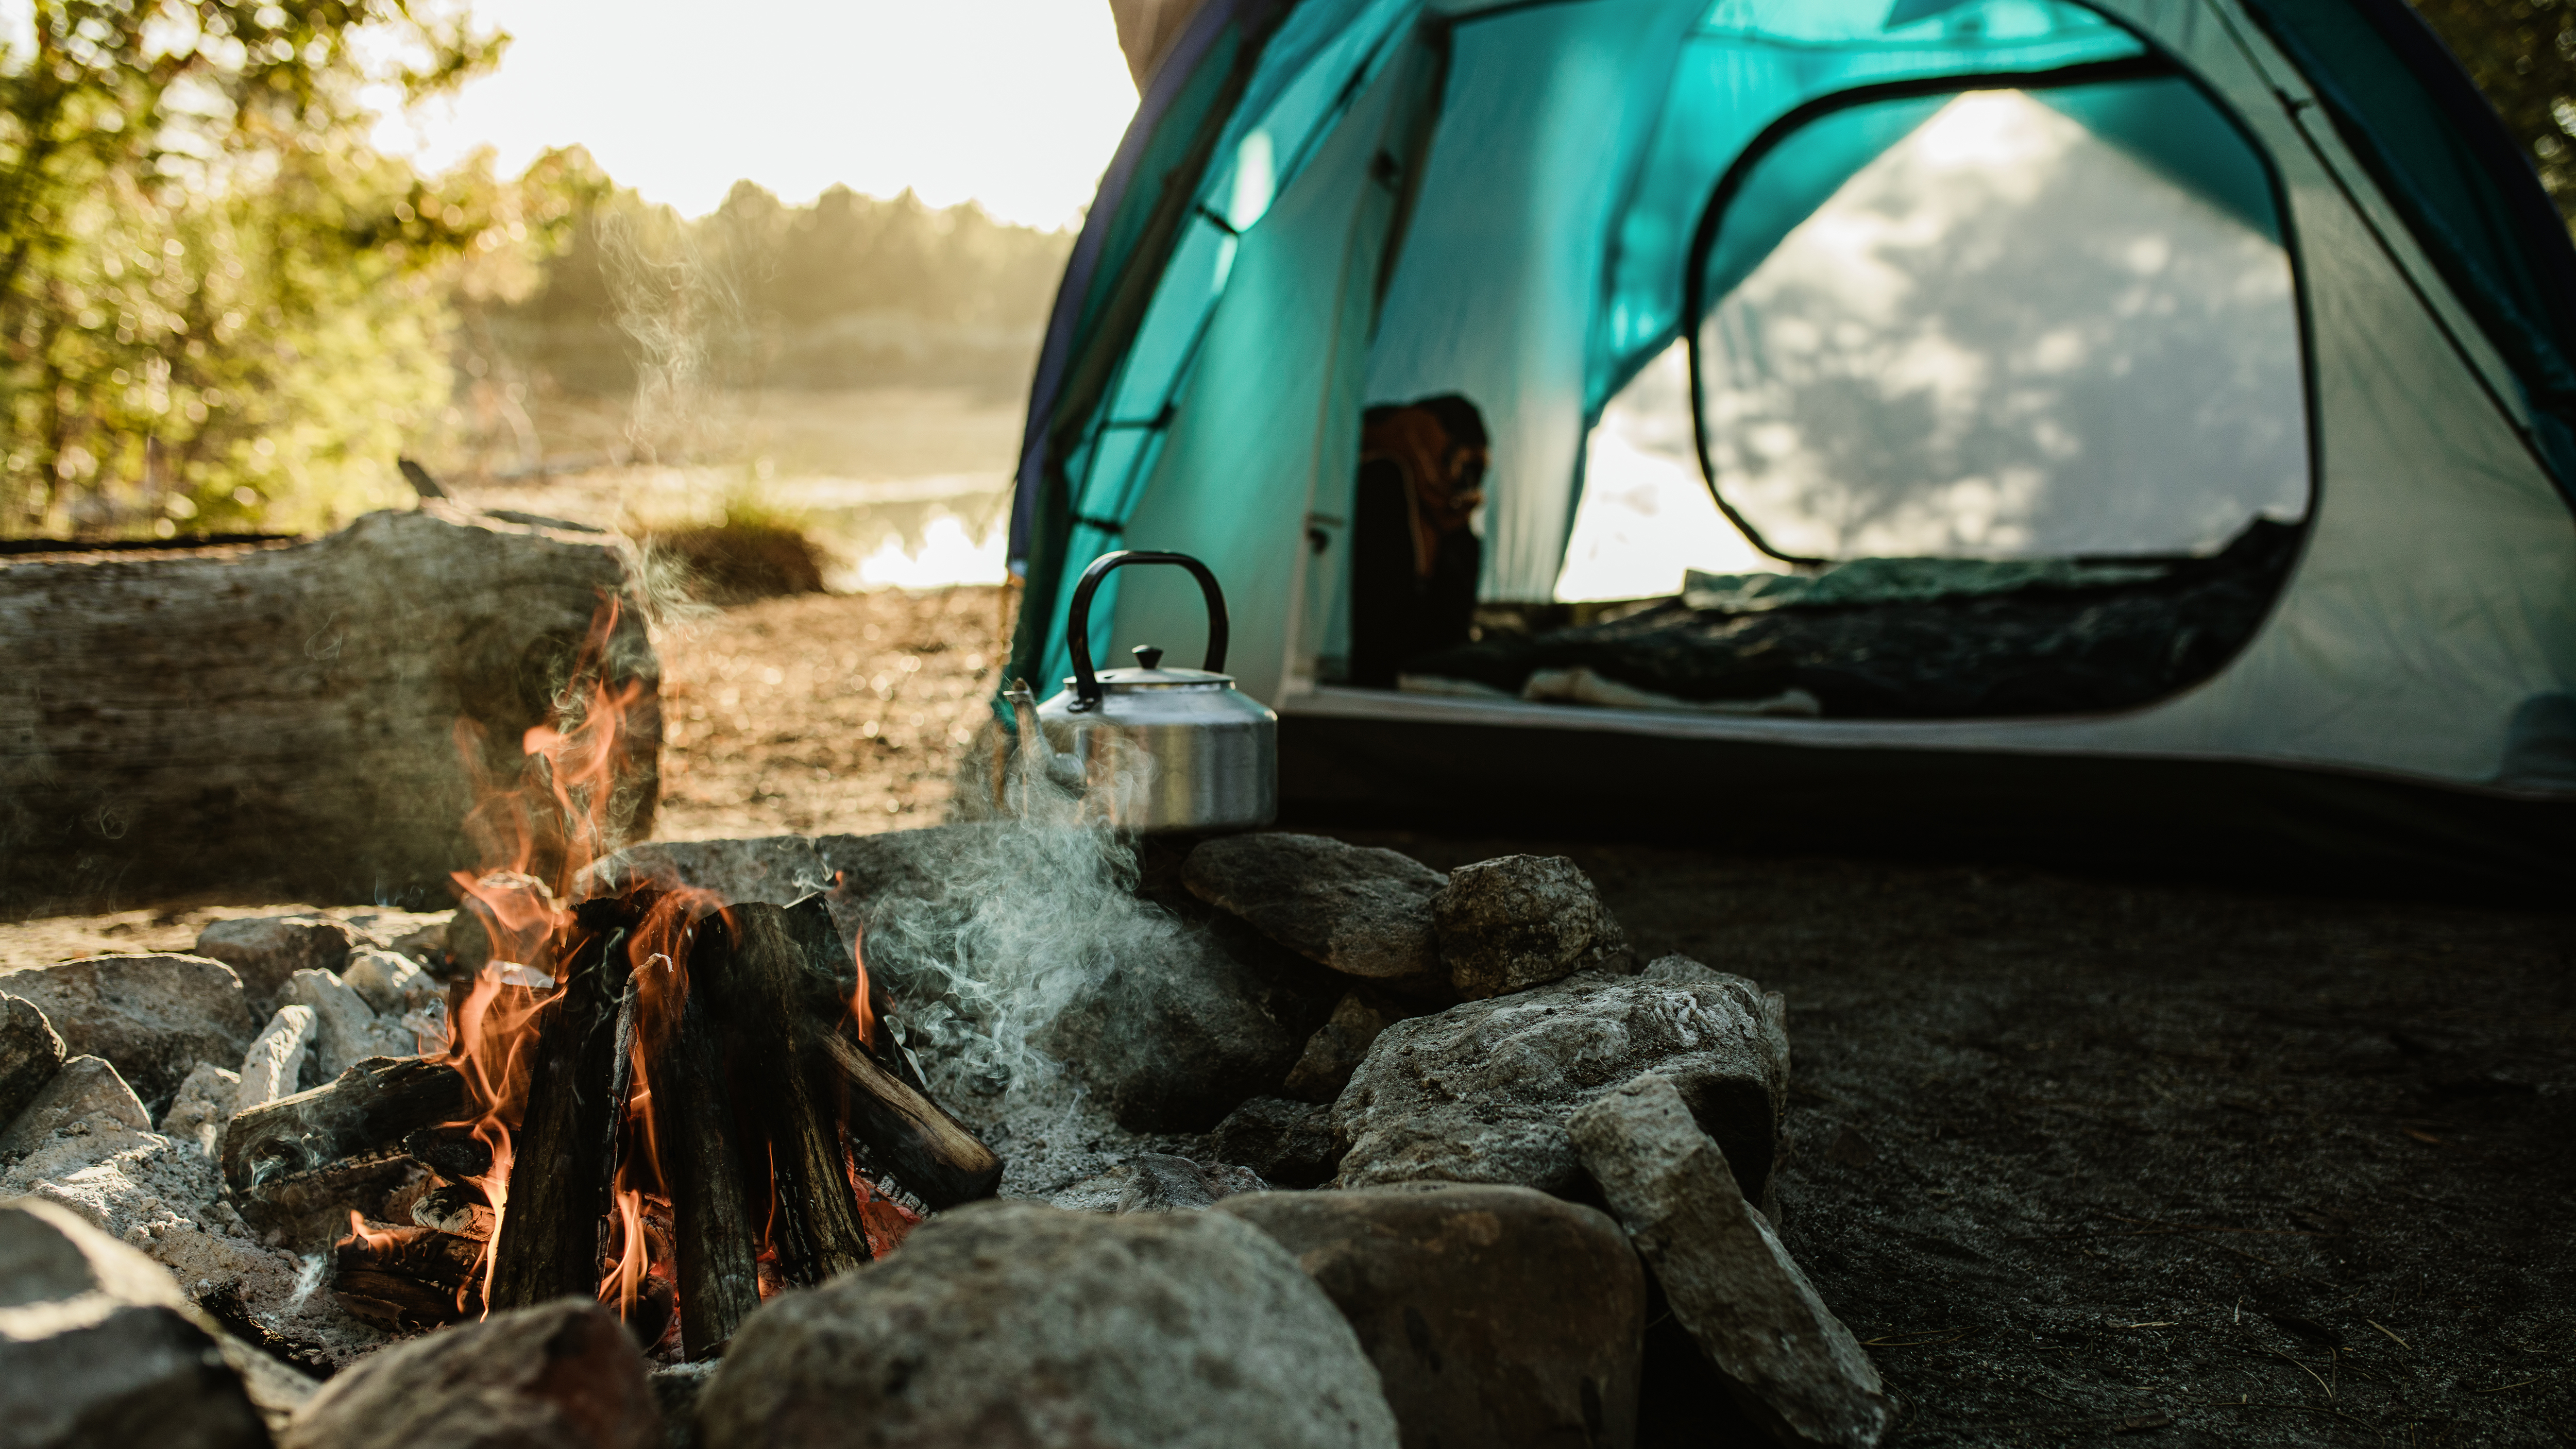 The Ultimate Guide To Backyard Camping (8 Genius Tips For Camping at Home)  - The Mandagies